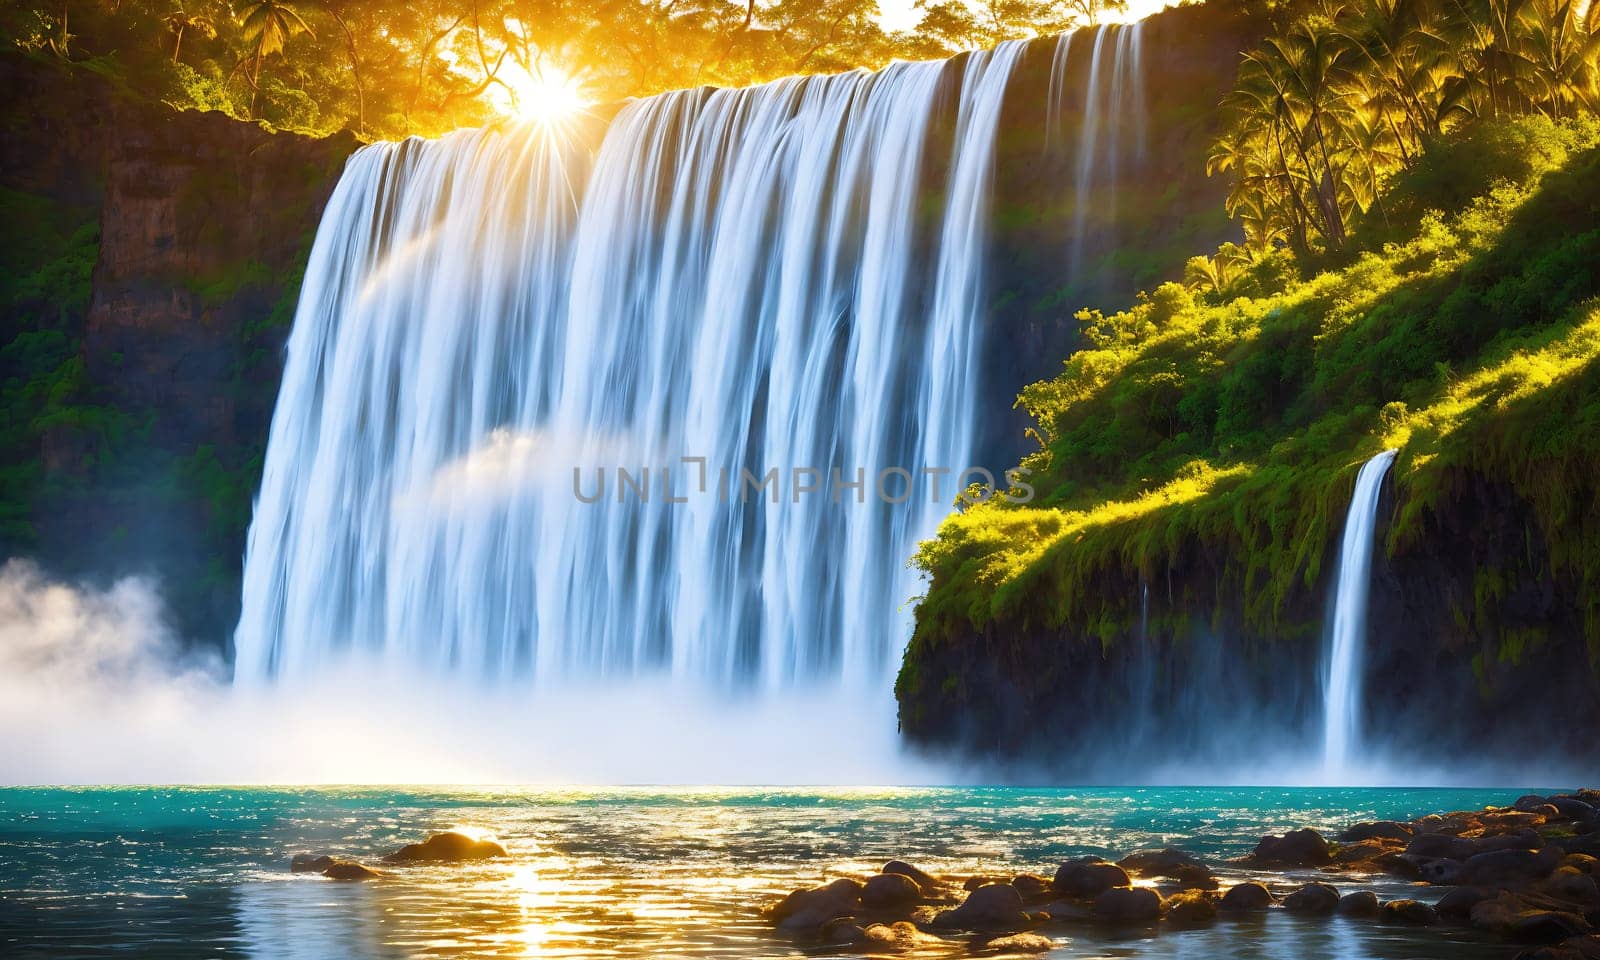 A beautiful waterfall in the middle of a lush forest. The sun is shining brightly, casting a warm glow on the water and by creart